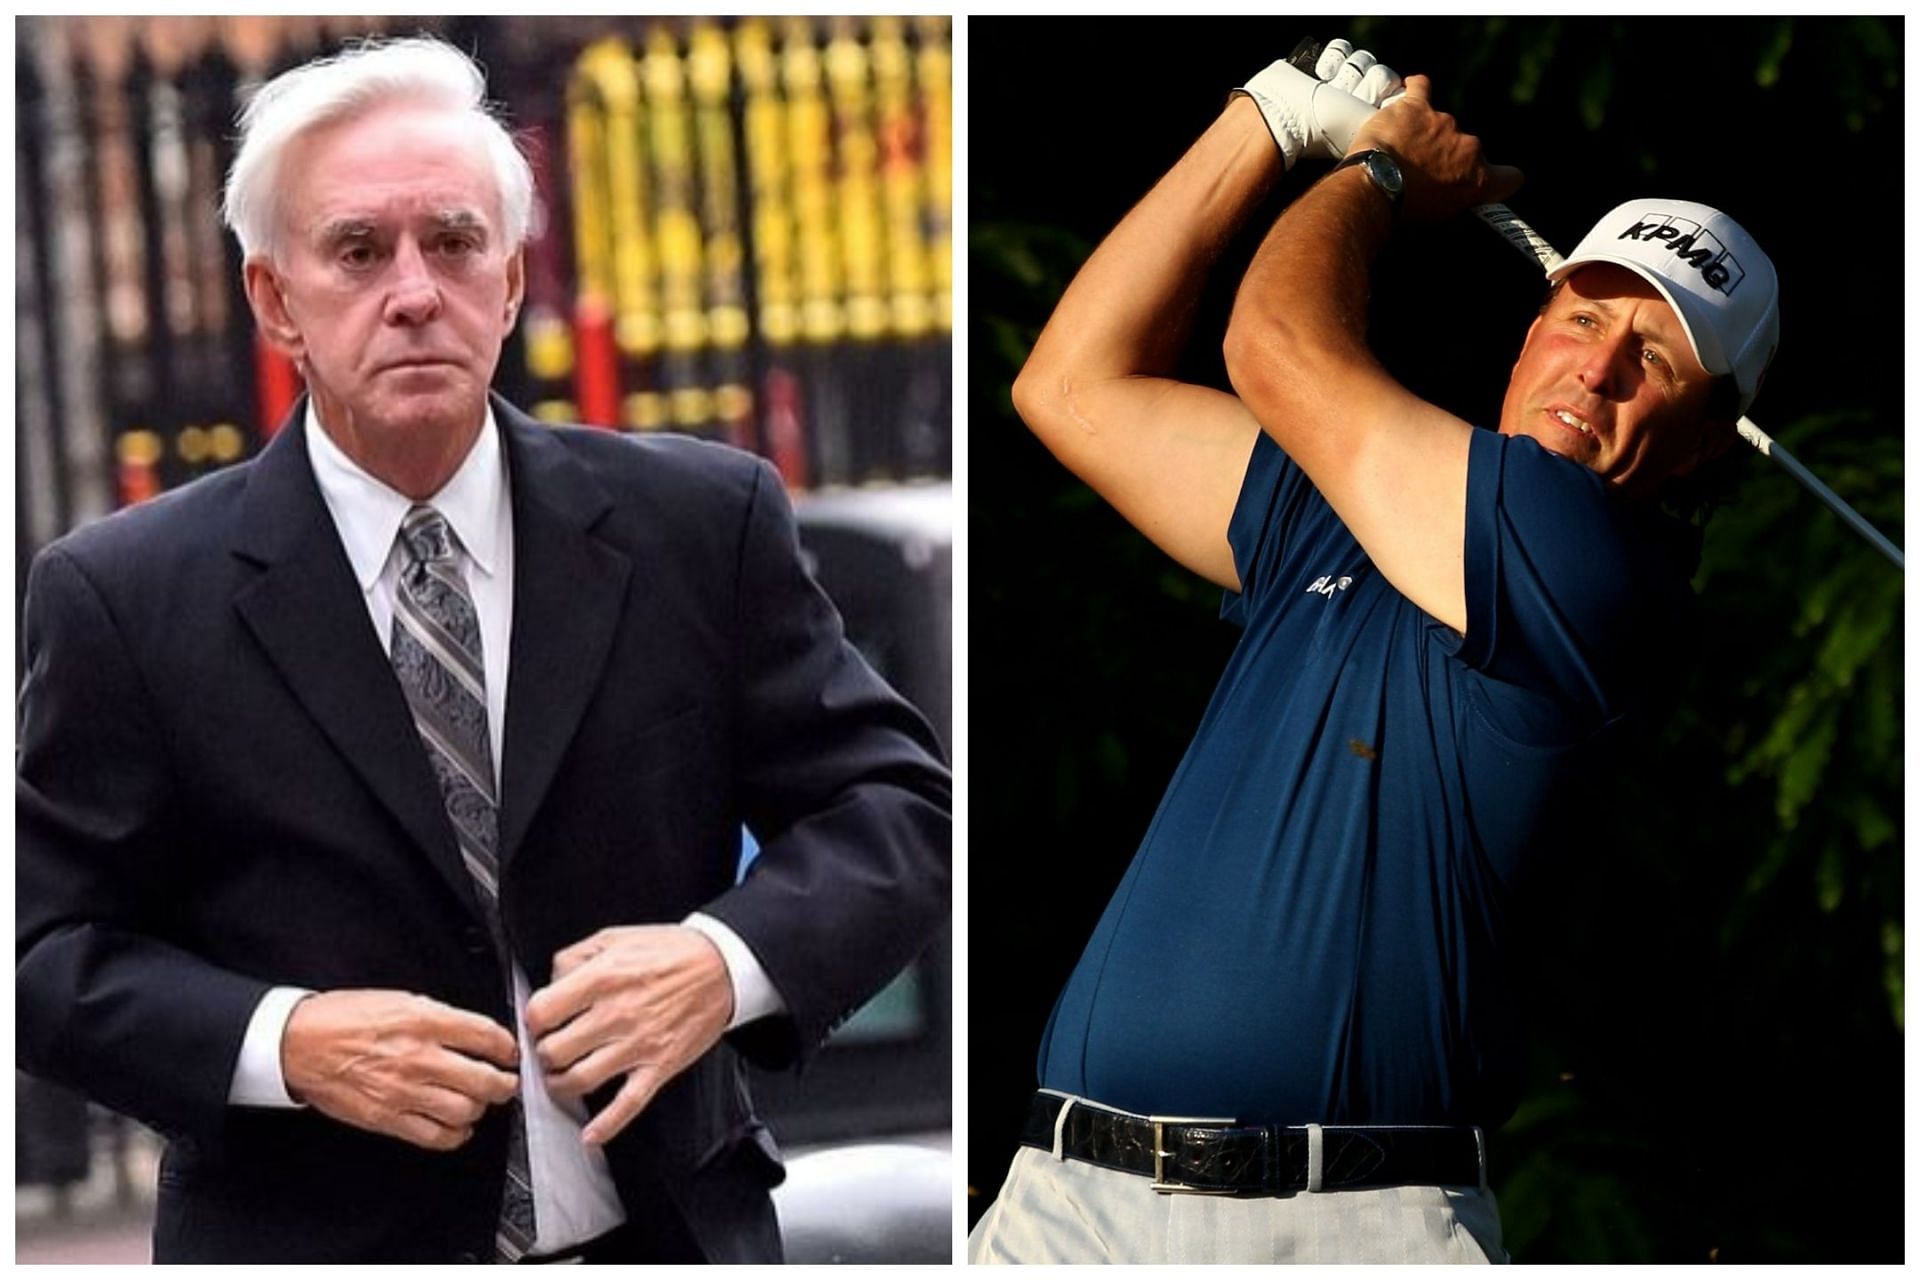 Billy Walters has made some serious allegations on Phil Mickelson in his new book